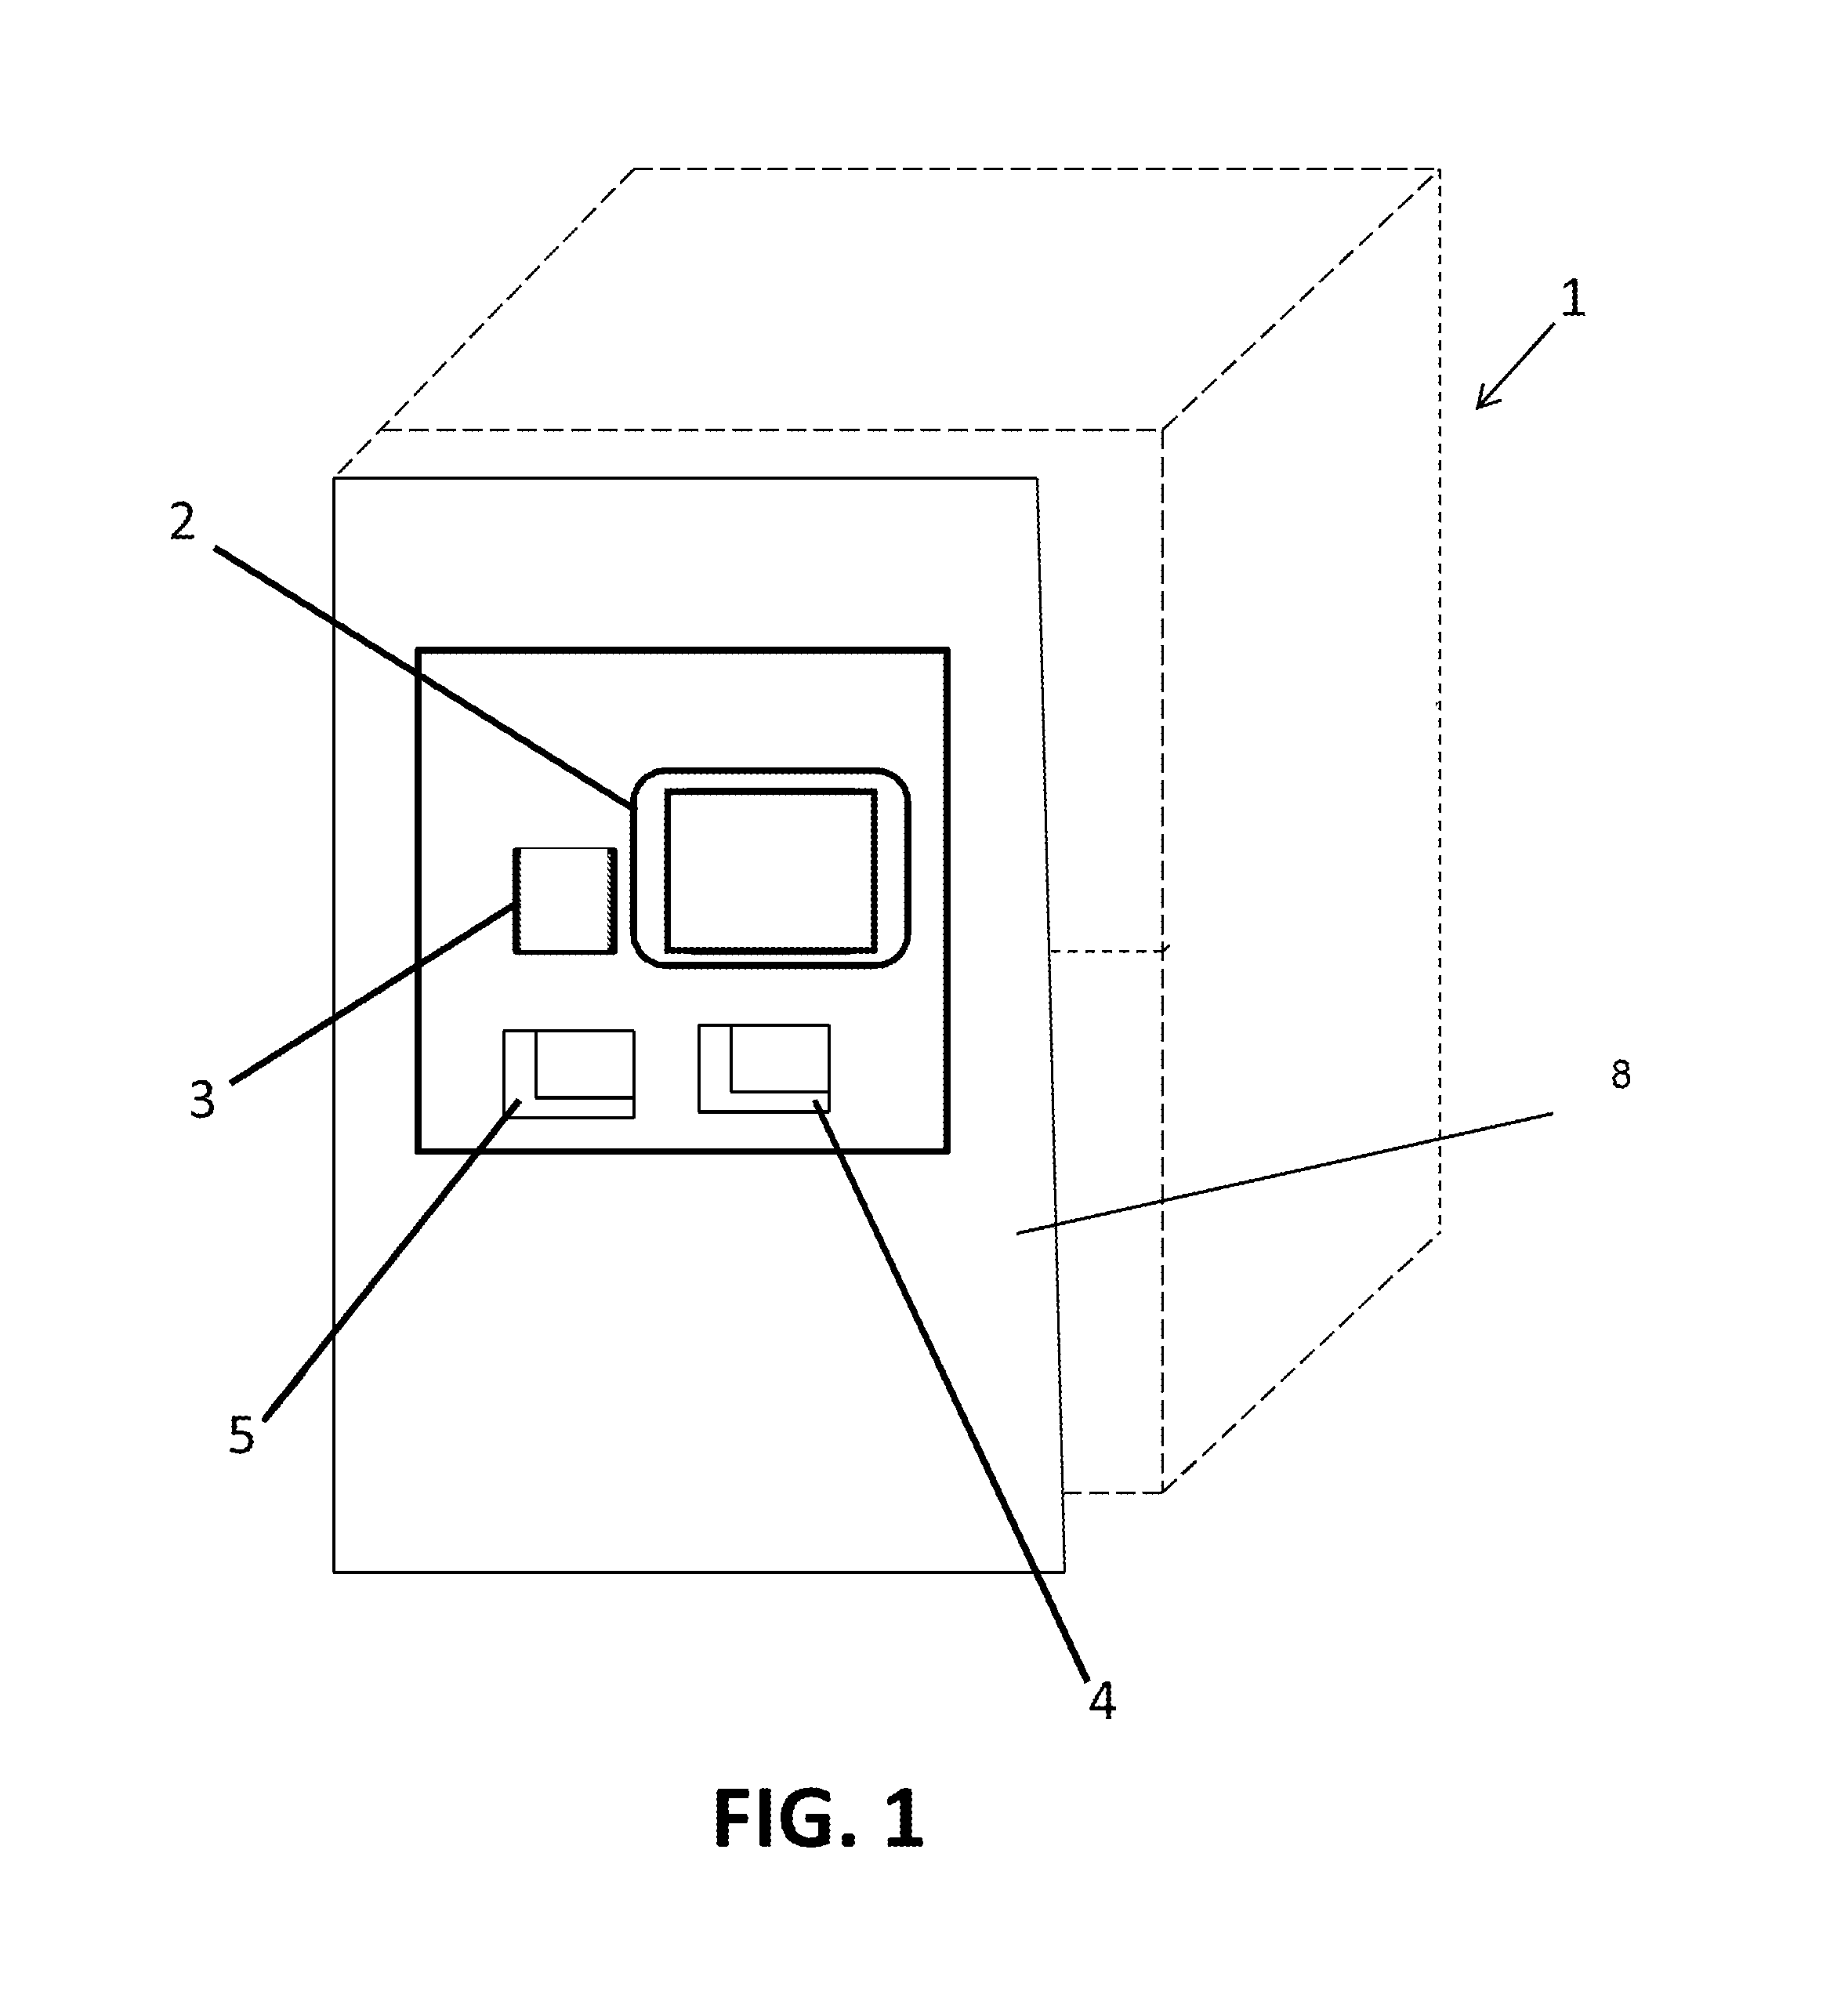 Apparatus and method for dispensing and receiving medical self-collection devices